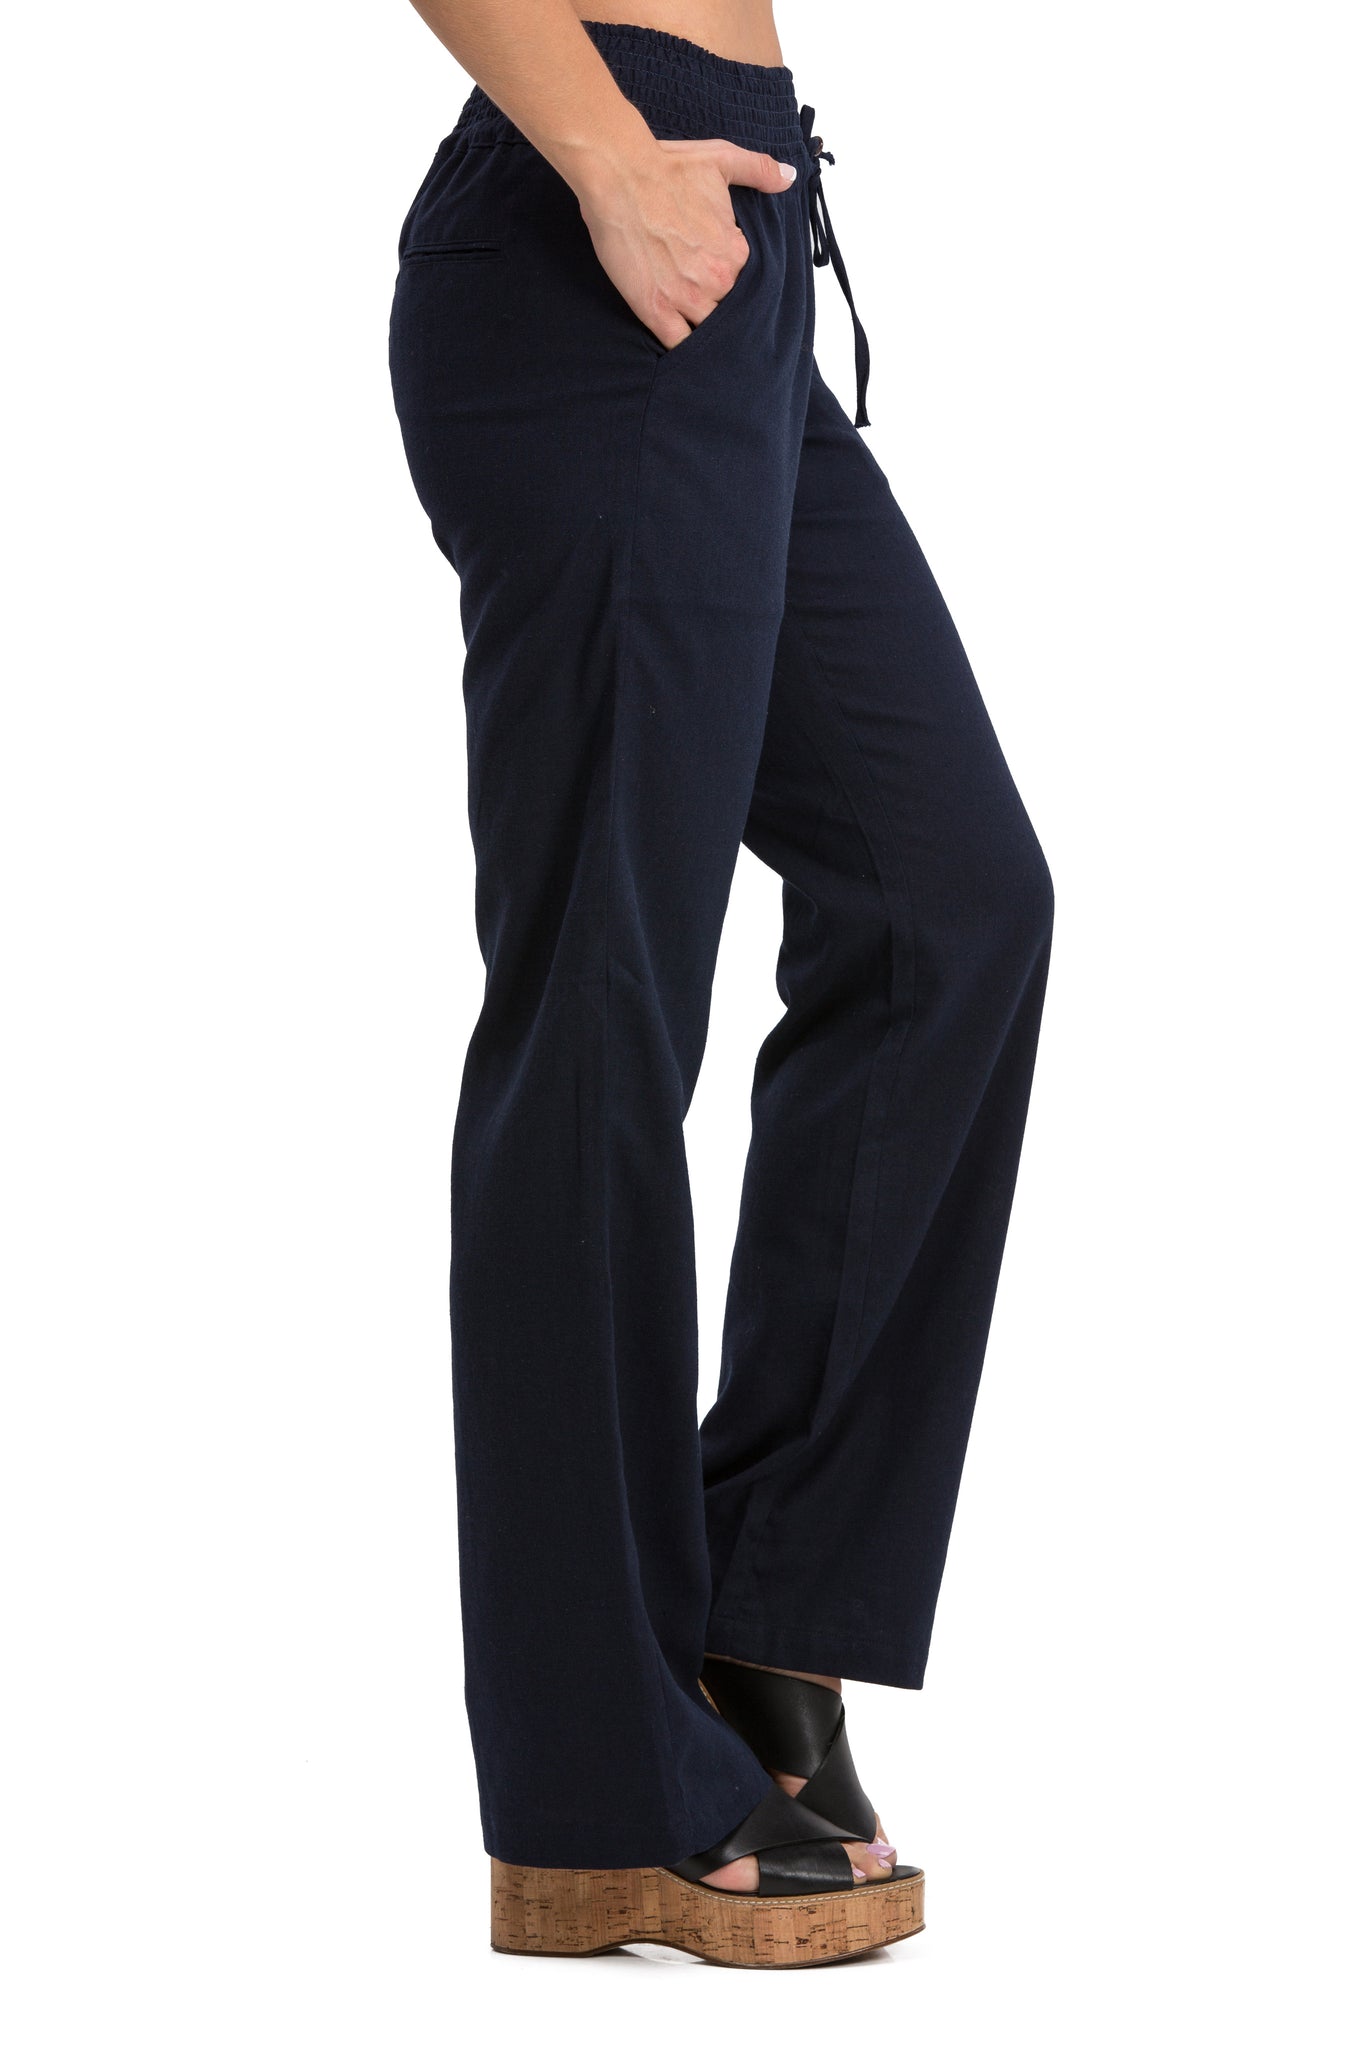 Comfy Drawstring Linen Pants Long with Smocked Band Waist (Navy) - Poplooks